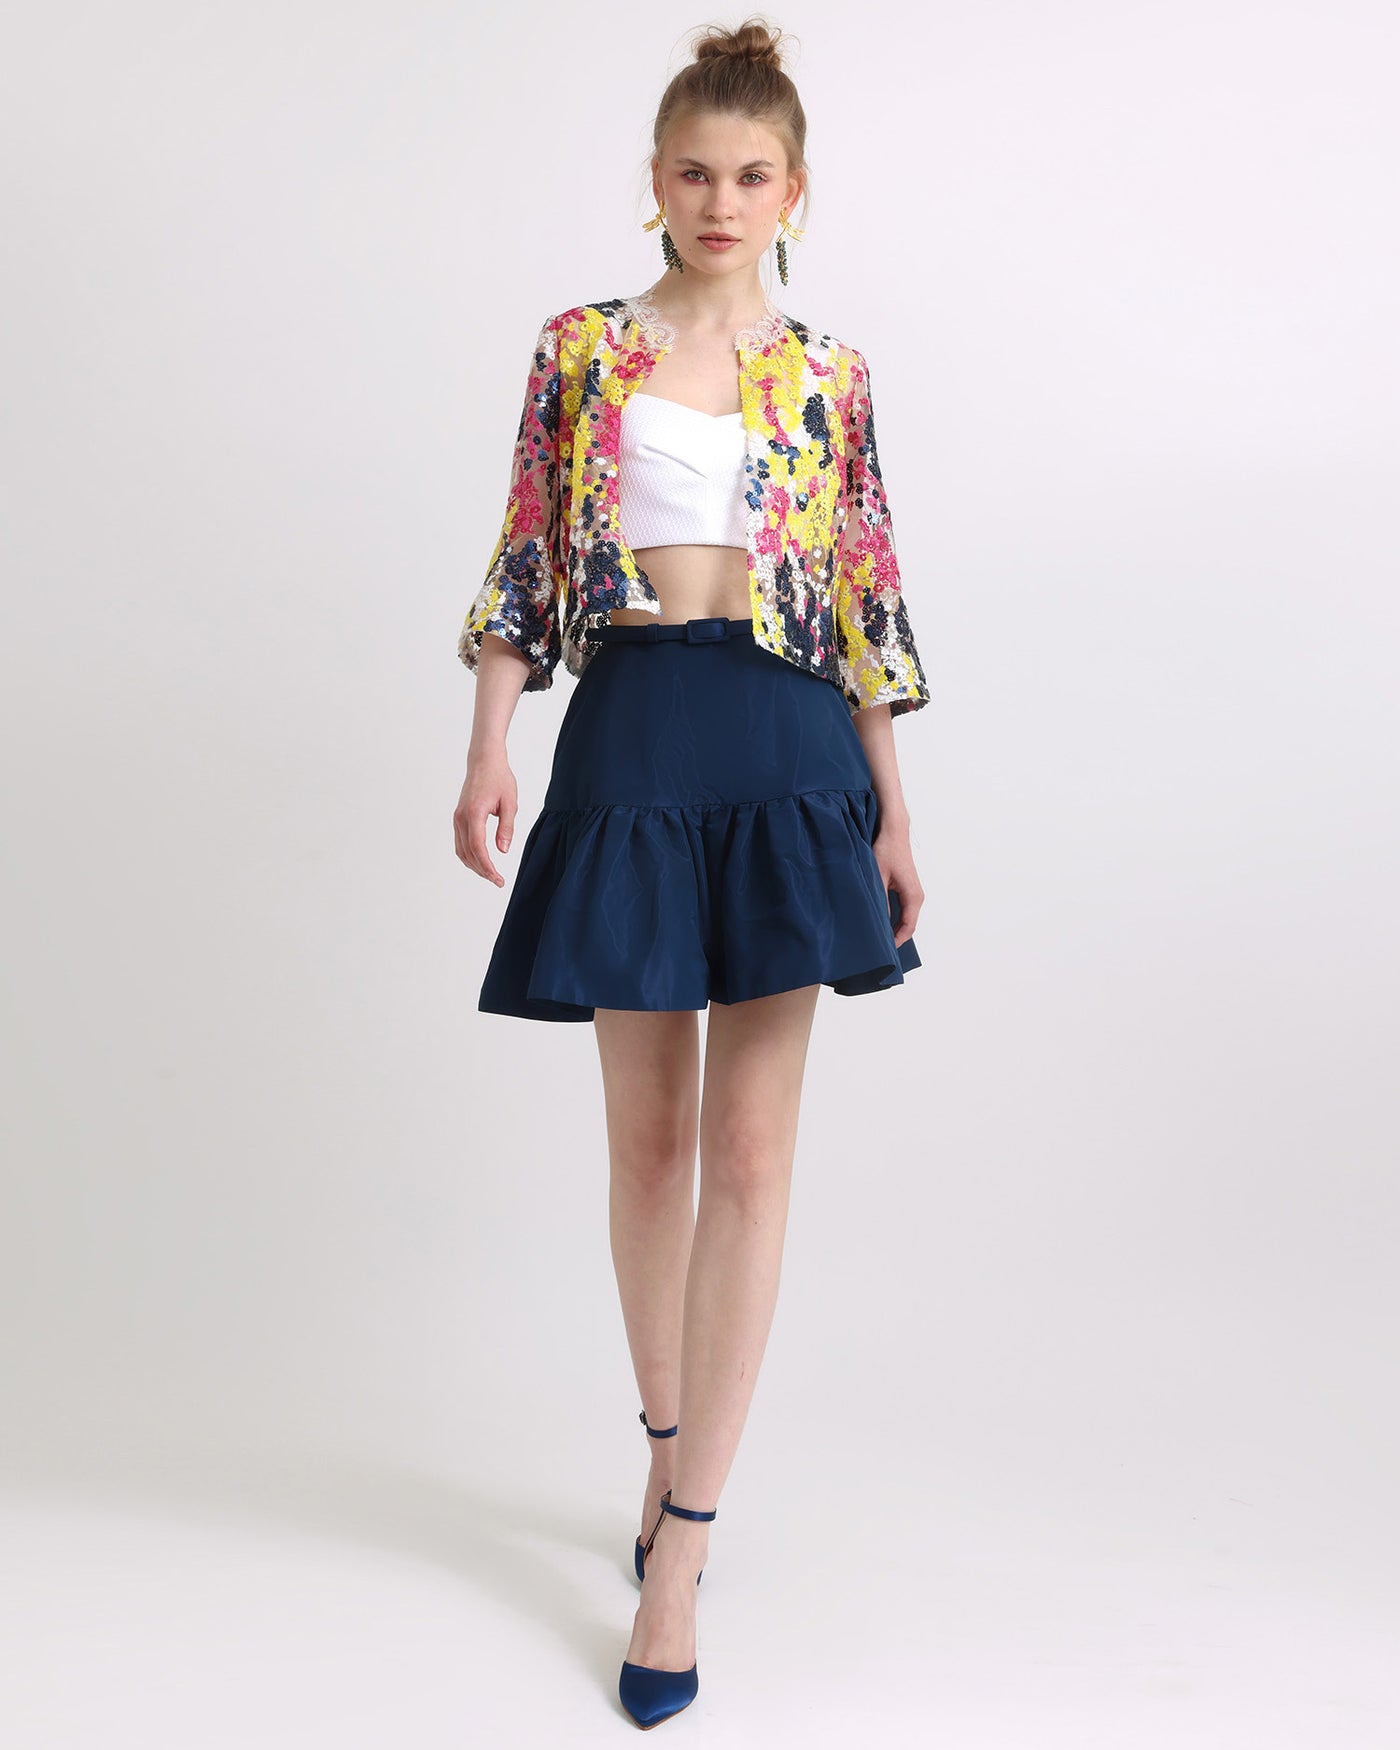 Cropped Top with Jacket and Short Skirt